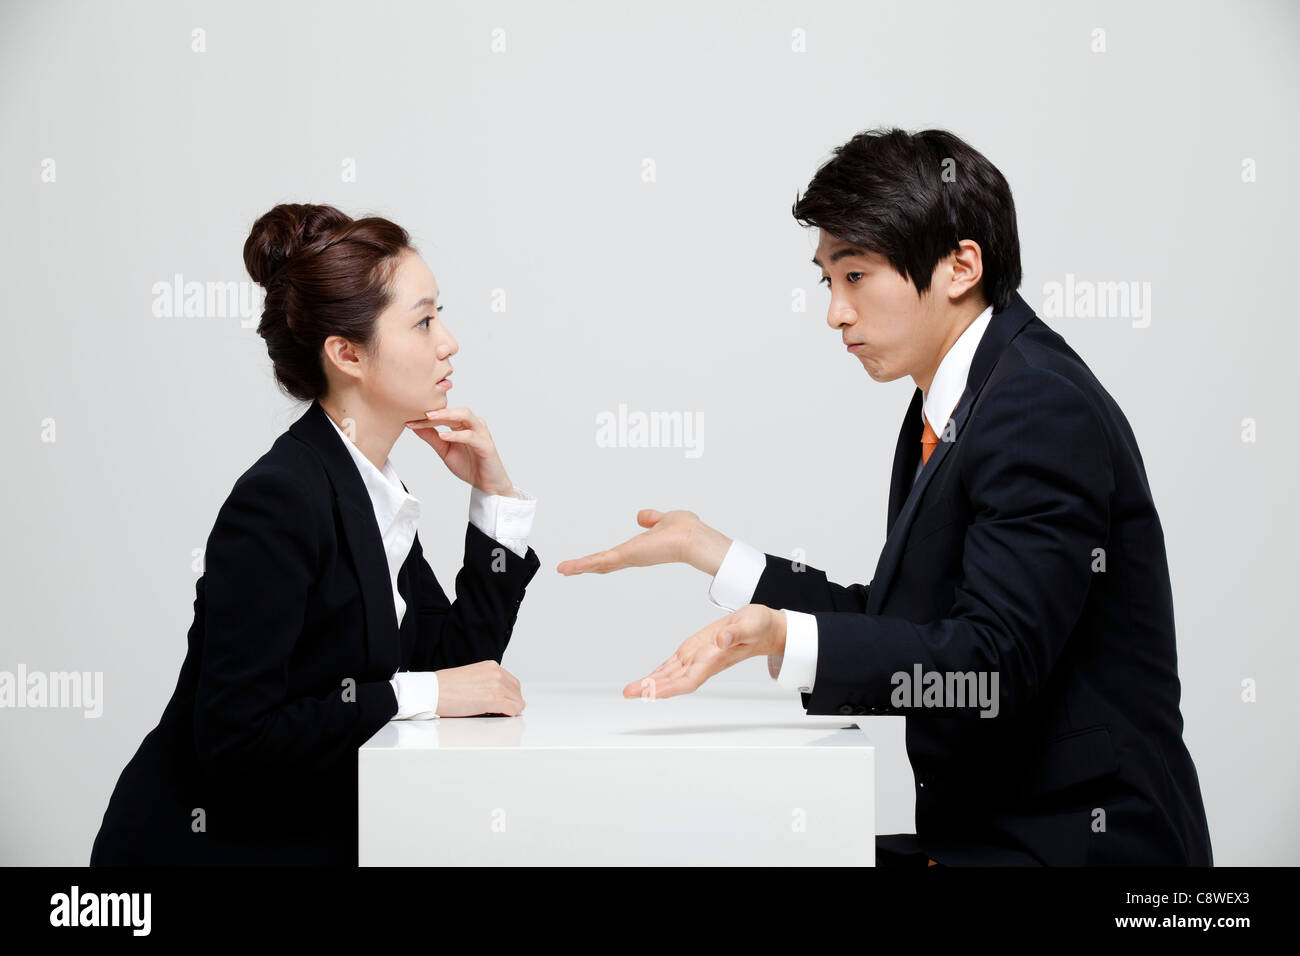 Asian Businesswoman And Businessman Having A Face To Face Discussion Stock Photo